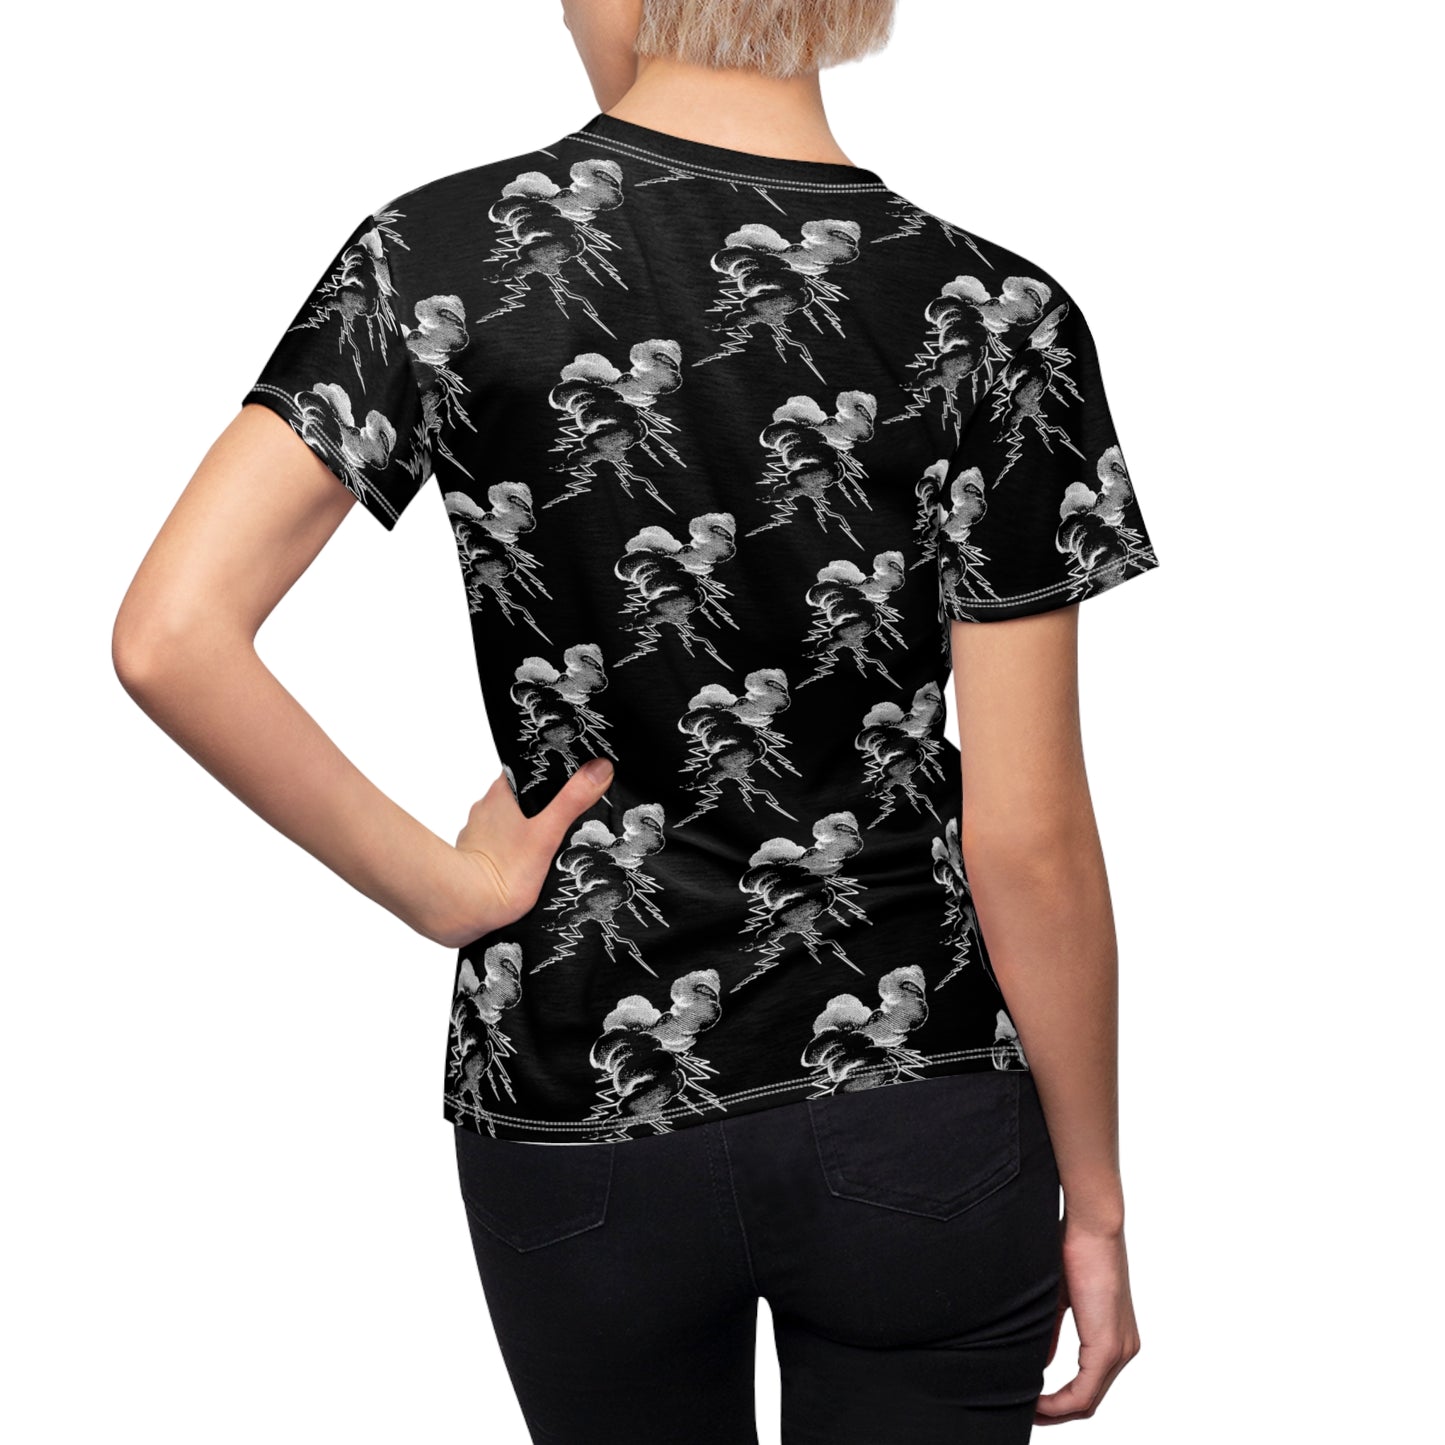 The LectriciTee Mark All-Over-Print Pattern Women's Tee